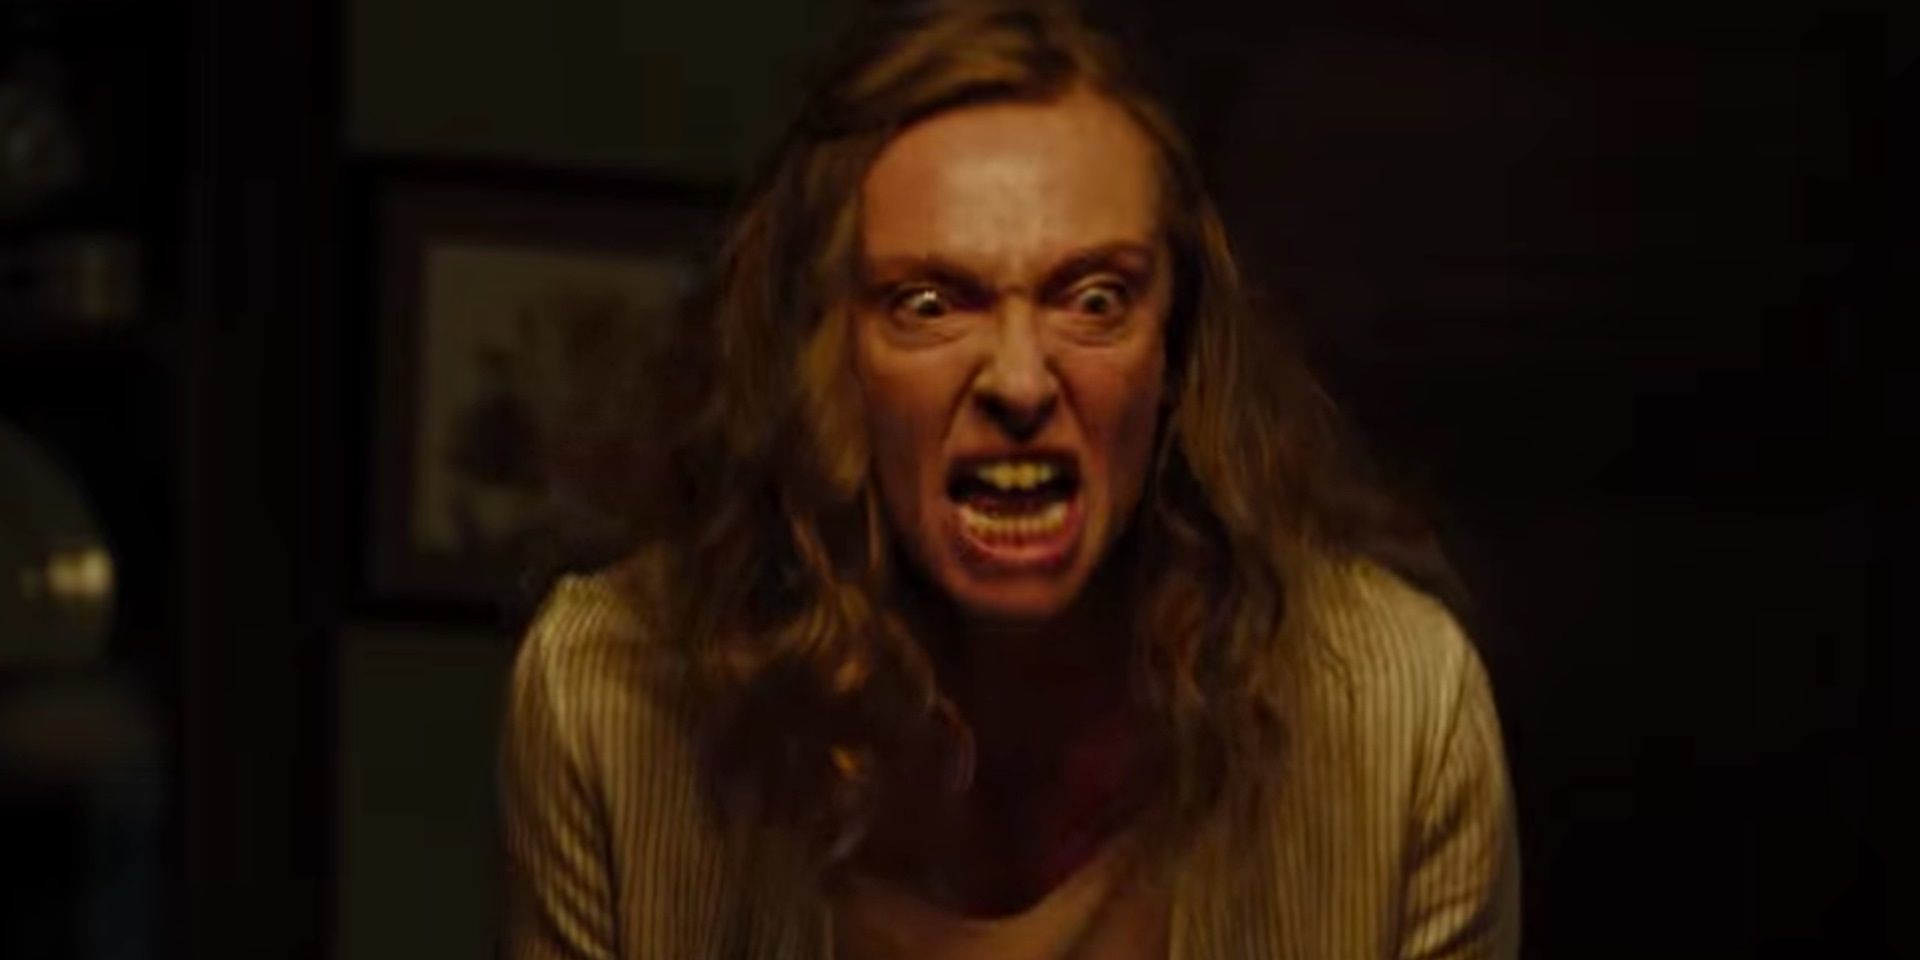 Toni Collette as Annie screaming manically in Hereditary